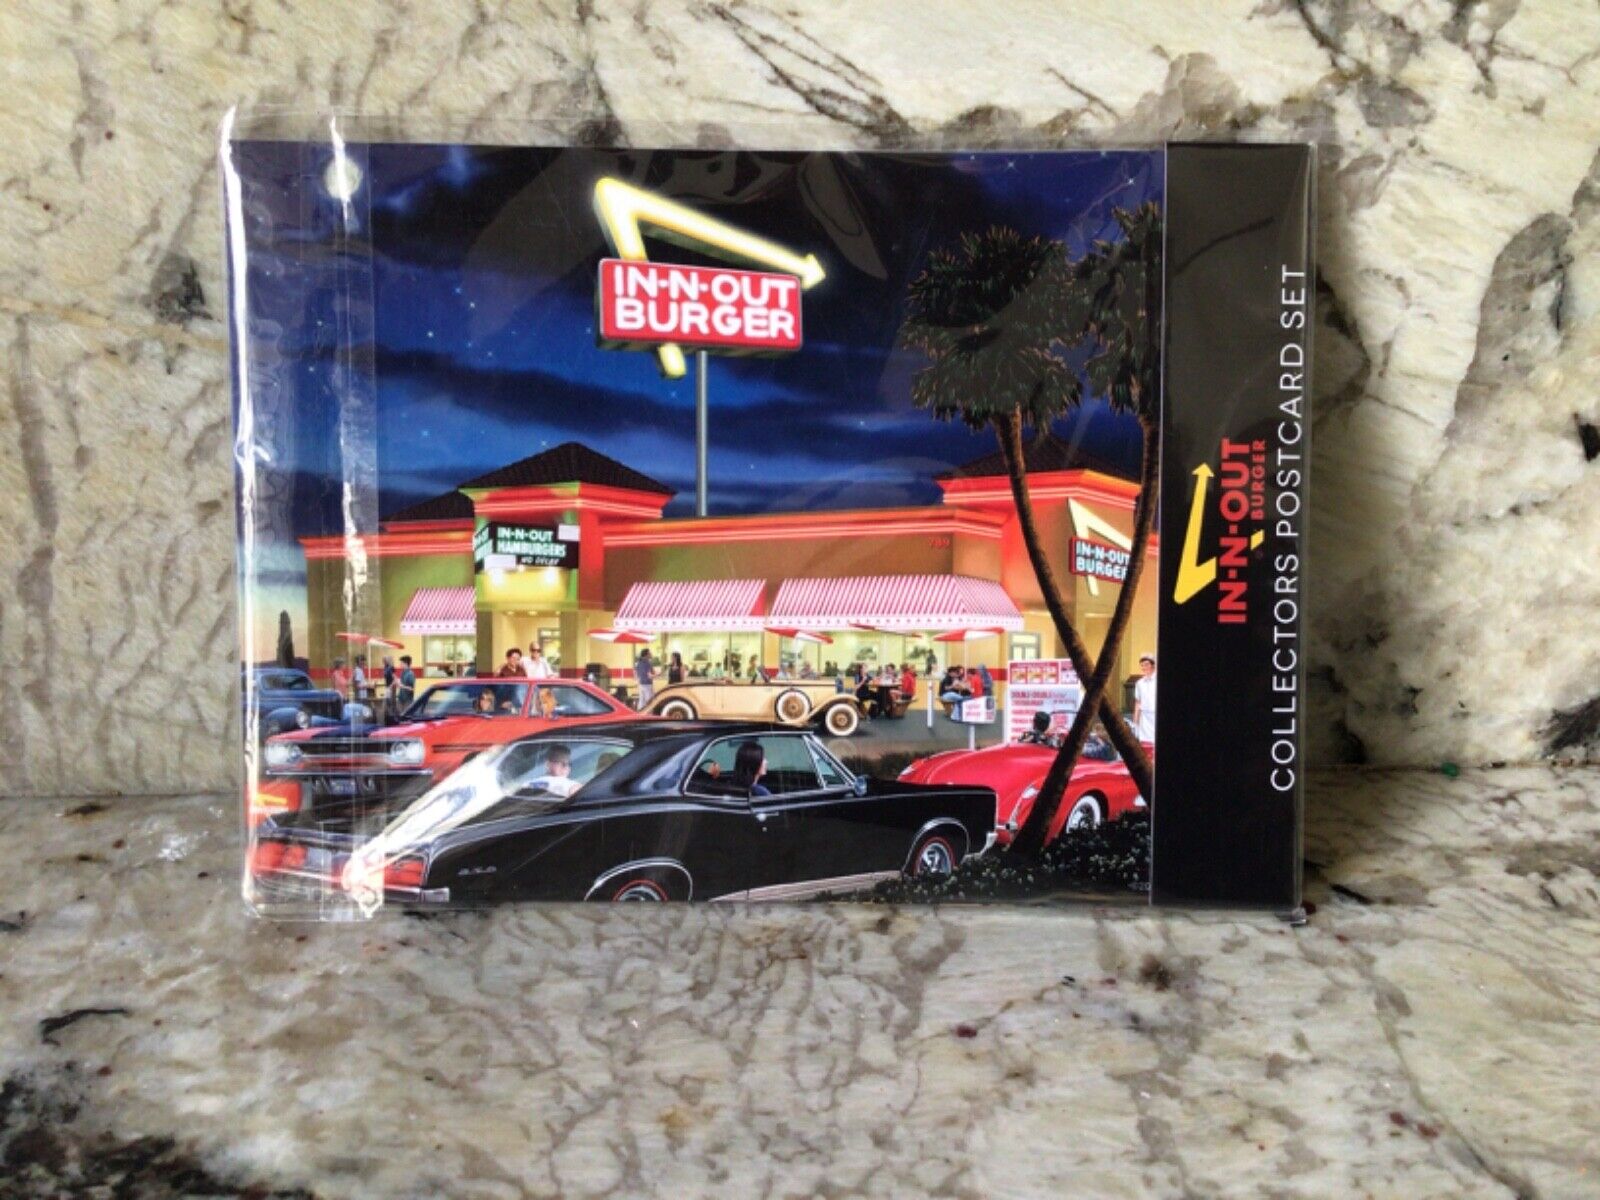 In & Out Burger Collectors Postcard Set